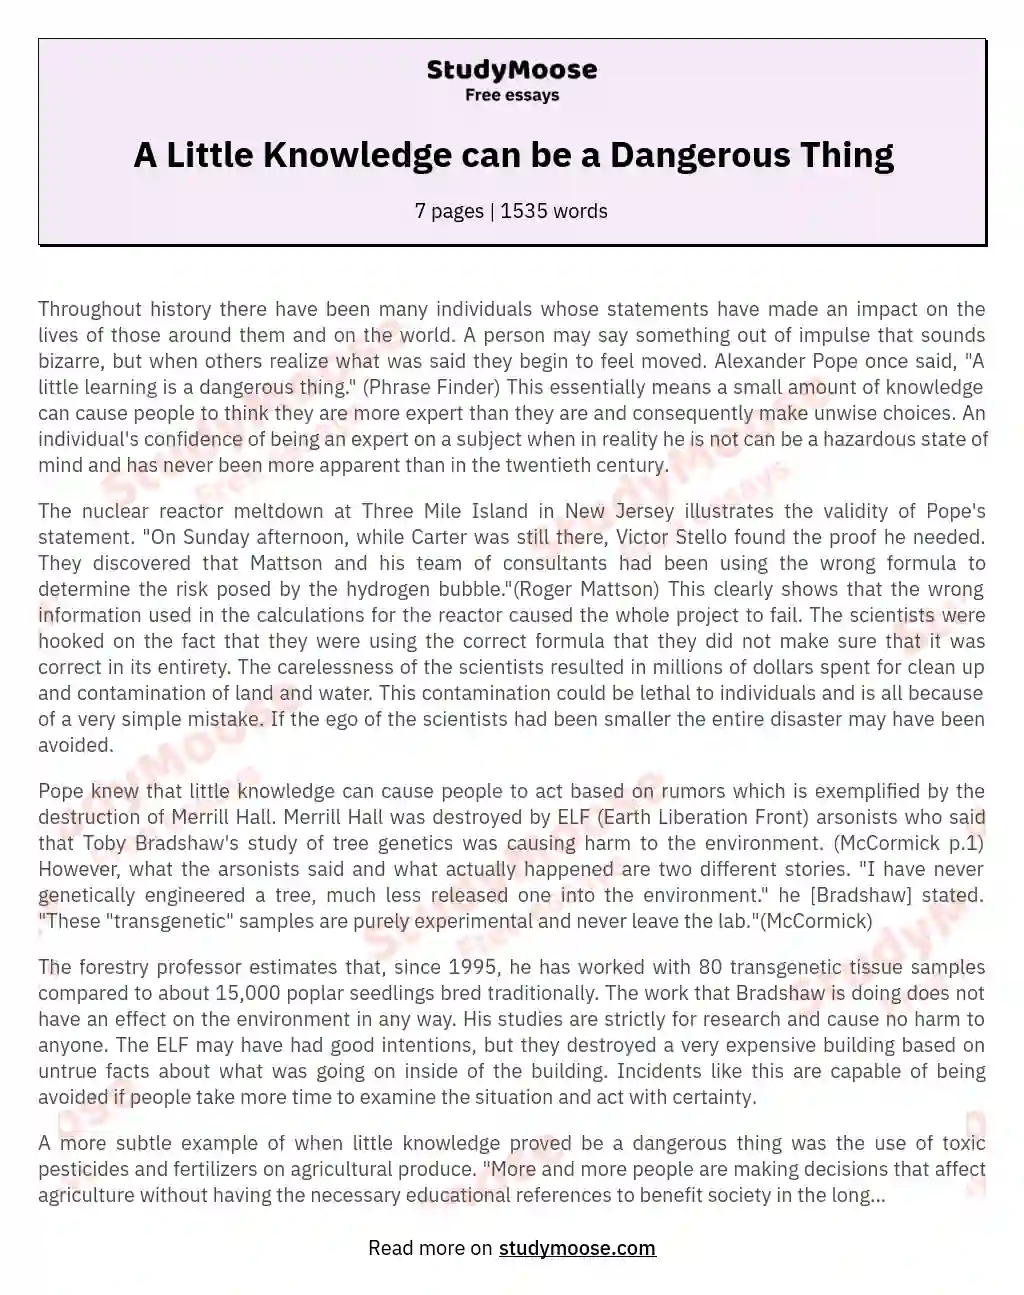 A Little Knowledge can be a Dangerous Thing essay